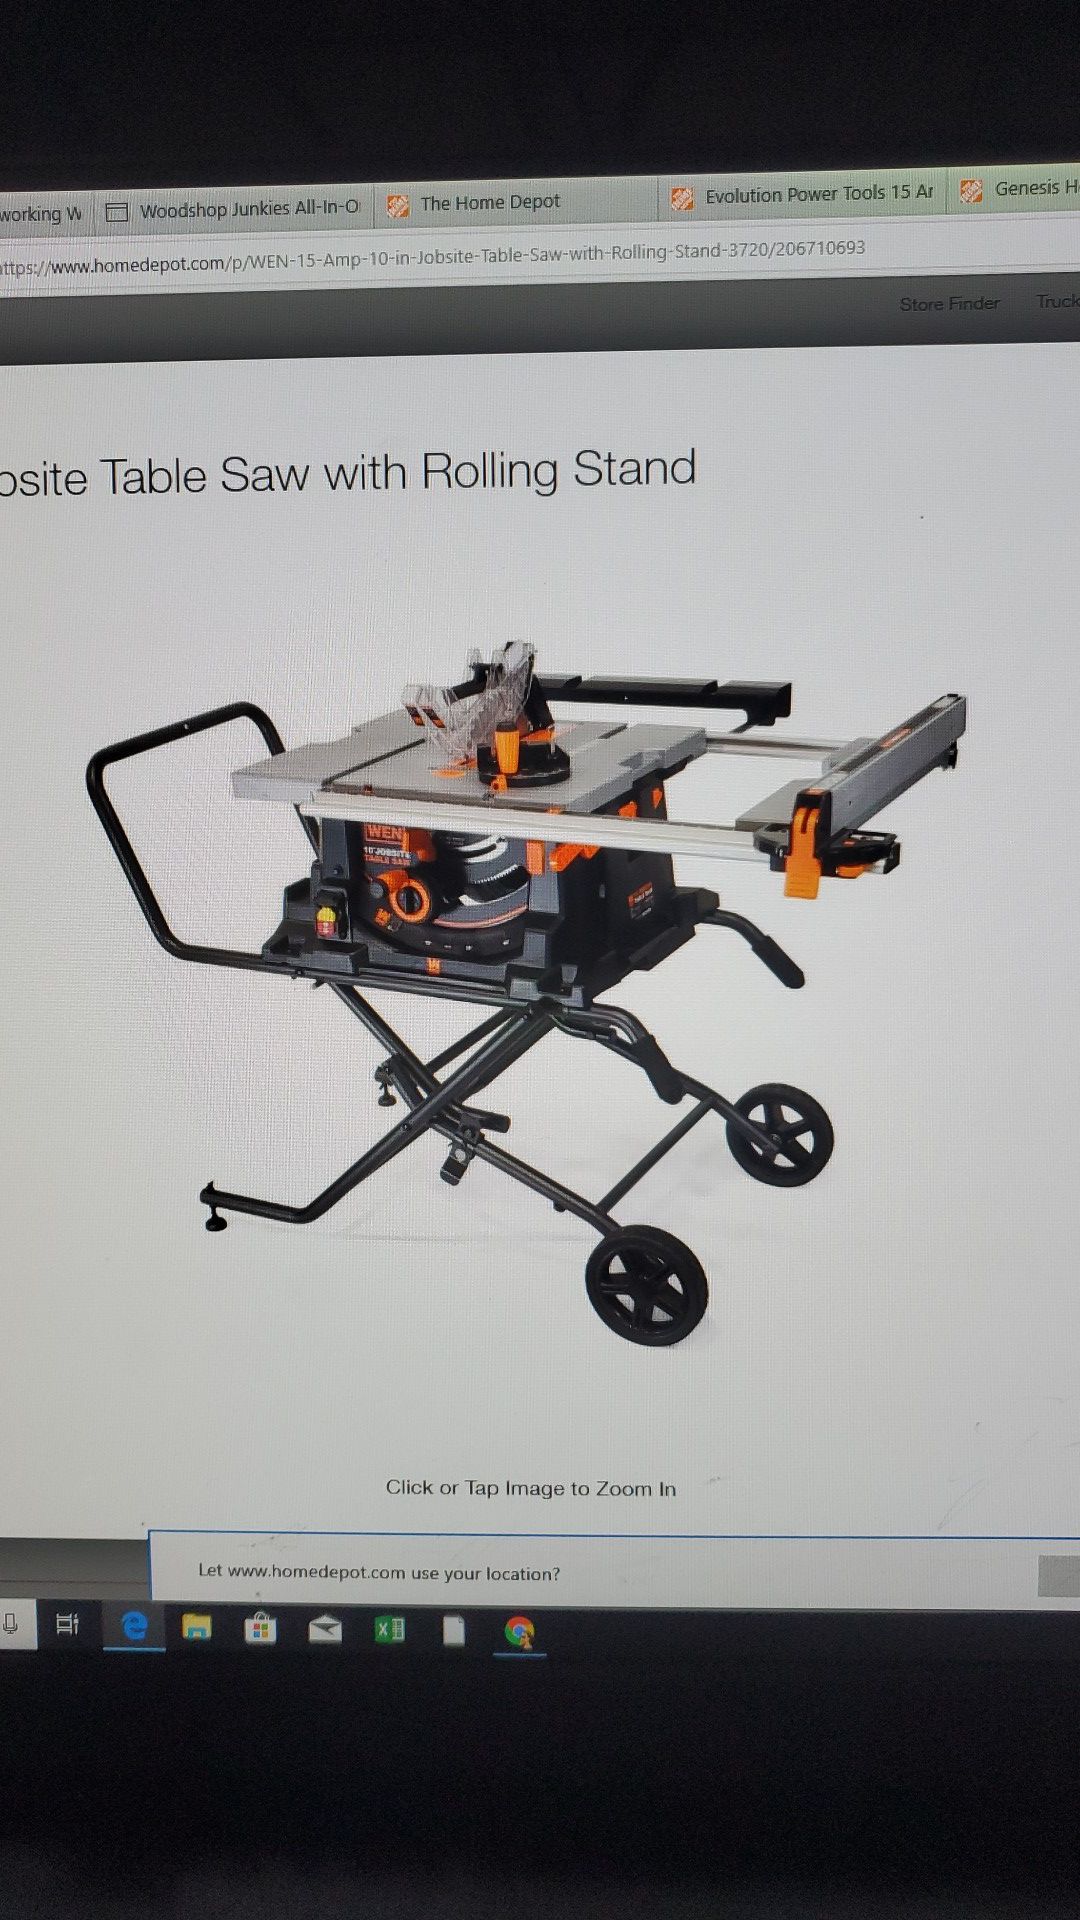 WEN 15 Amp 10 in. Jobsite Table Saw with Rolling Stand